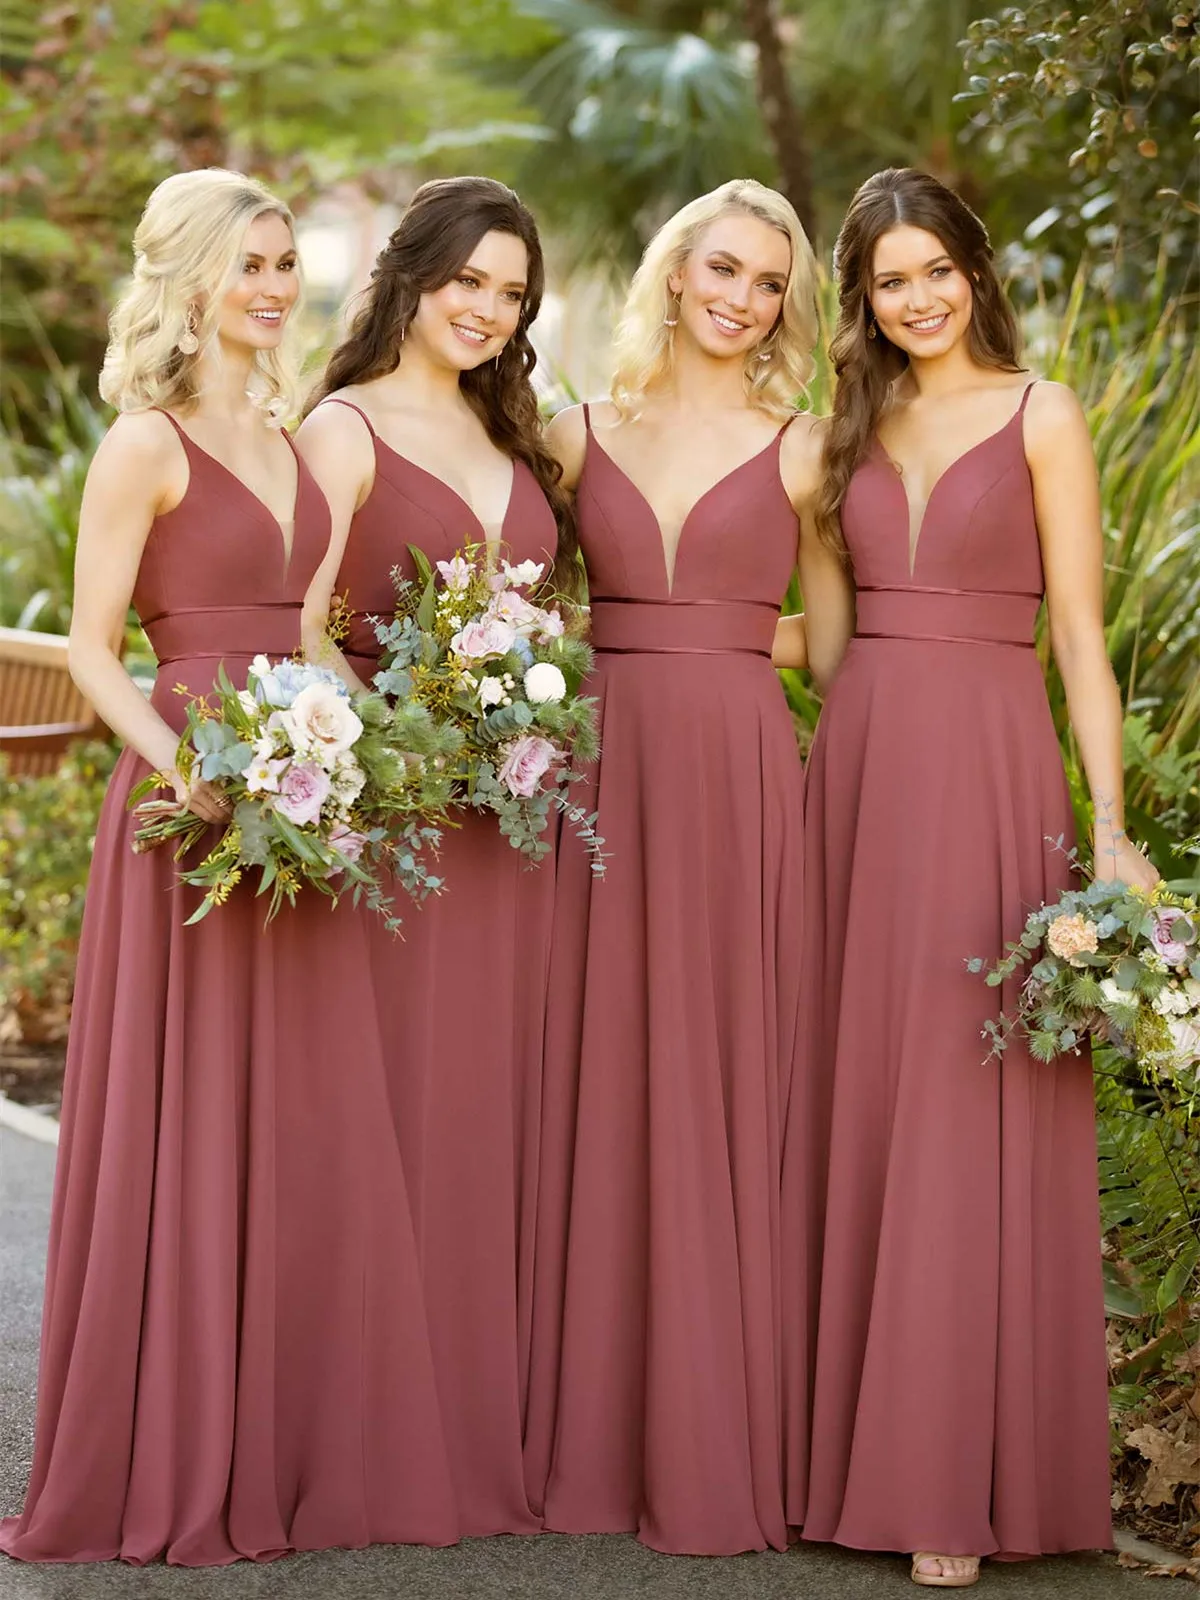 Spaghetti Straps Bridesmaid Deep V-Neck Satin Simple Long Party Gown